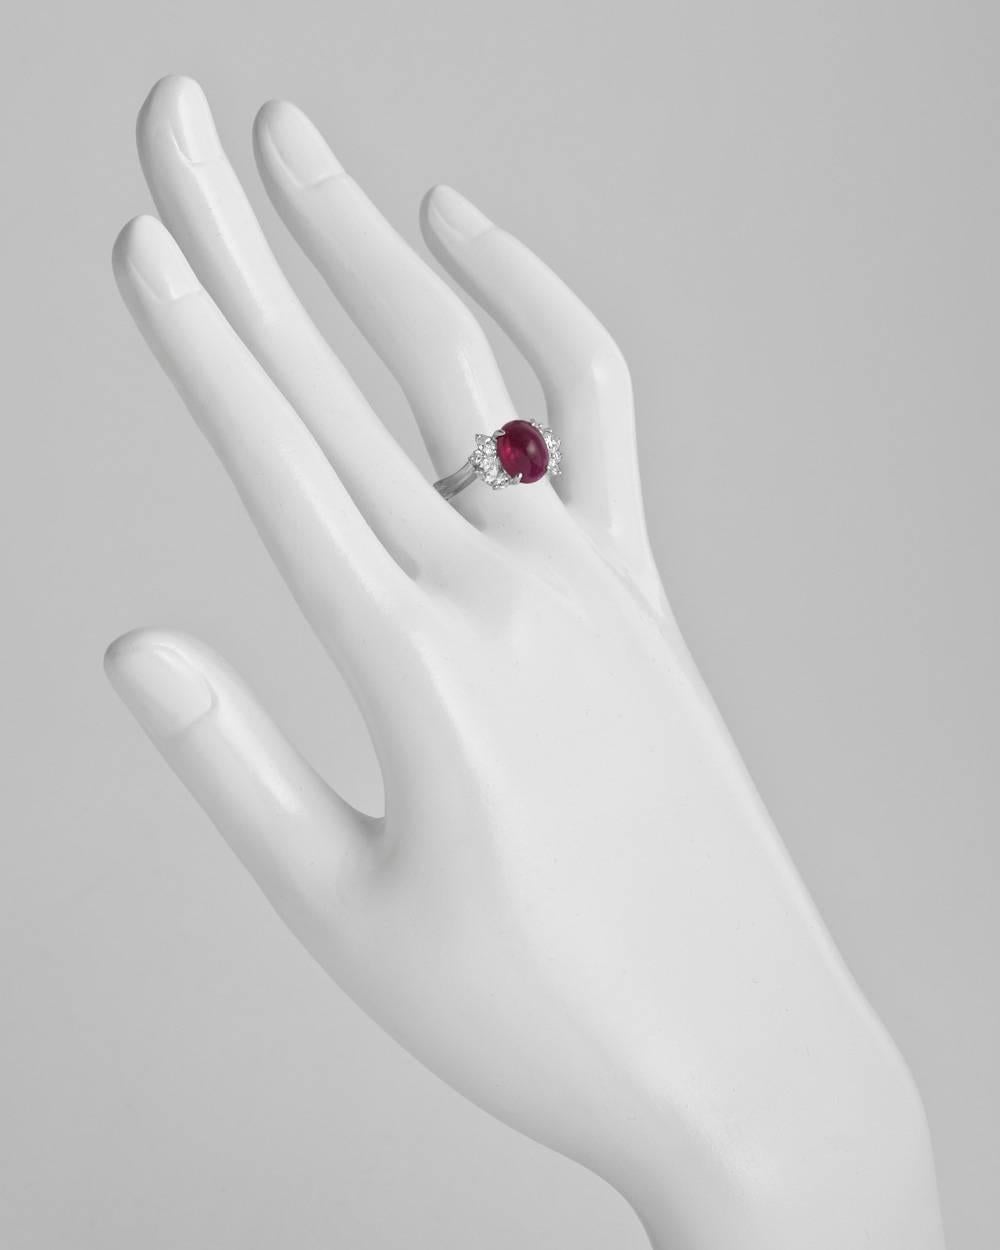 Cluster ring, centering an oval-shaped cabochon-cut ruby weighing approximately 3.12 carats flanked by a cluster of round brilliant-cut, pear-shaped and marquise-shaped diamonds at either shoulder, the diamonds altogether weighing approximately 0.54